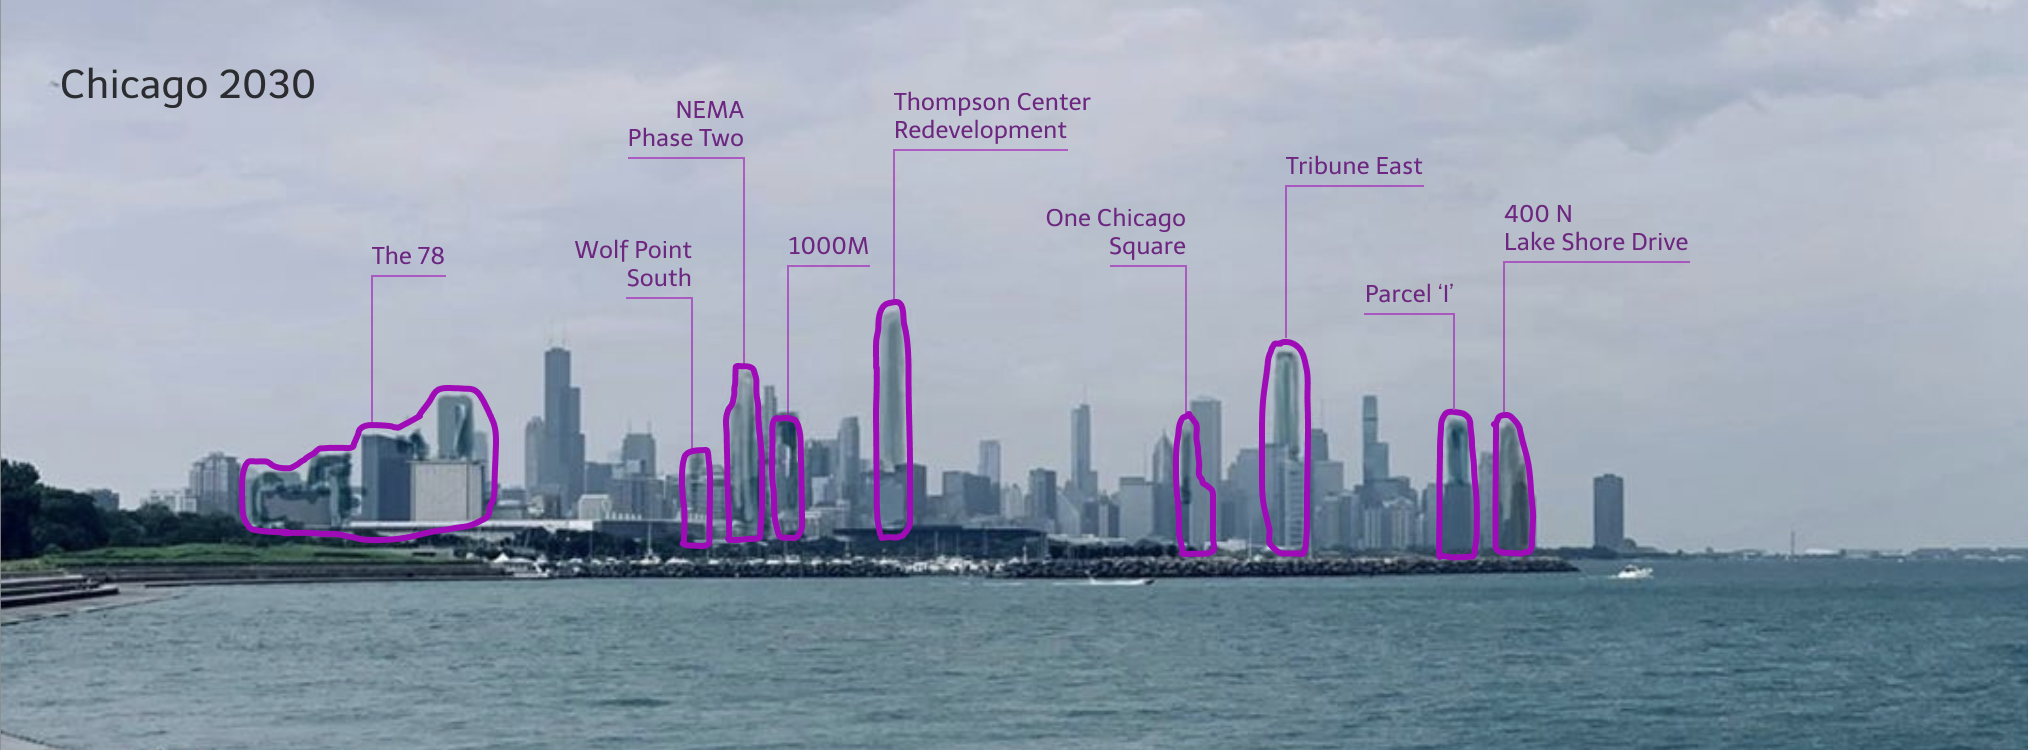 Annotated rendering of Chicago 2030